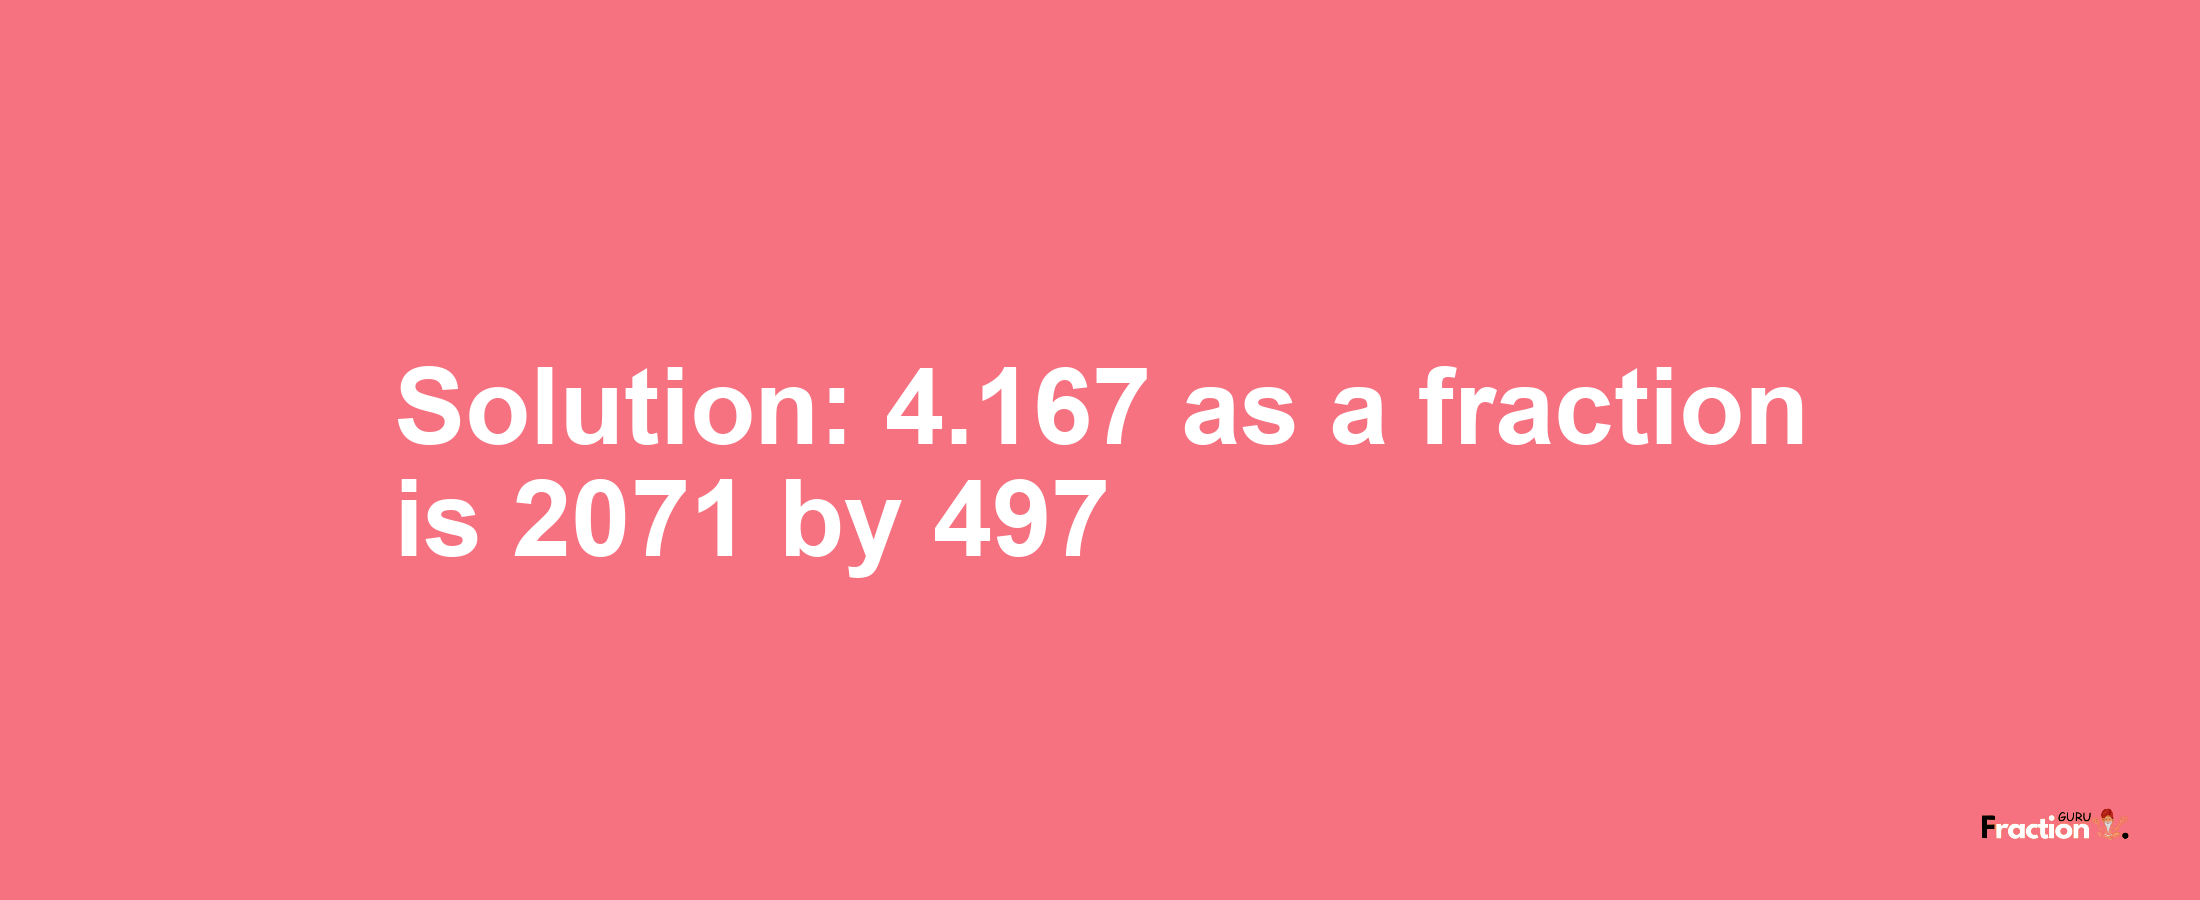 Solution:4.167 as a fraction is 2071/497